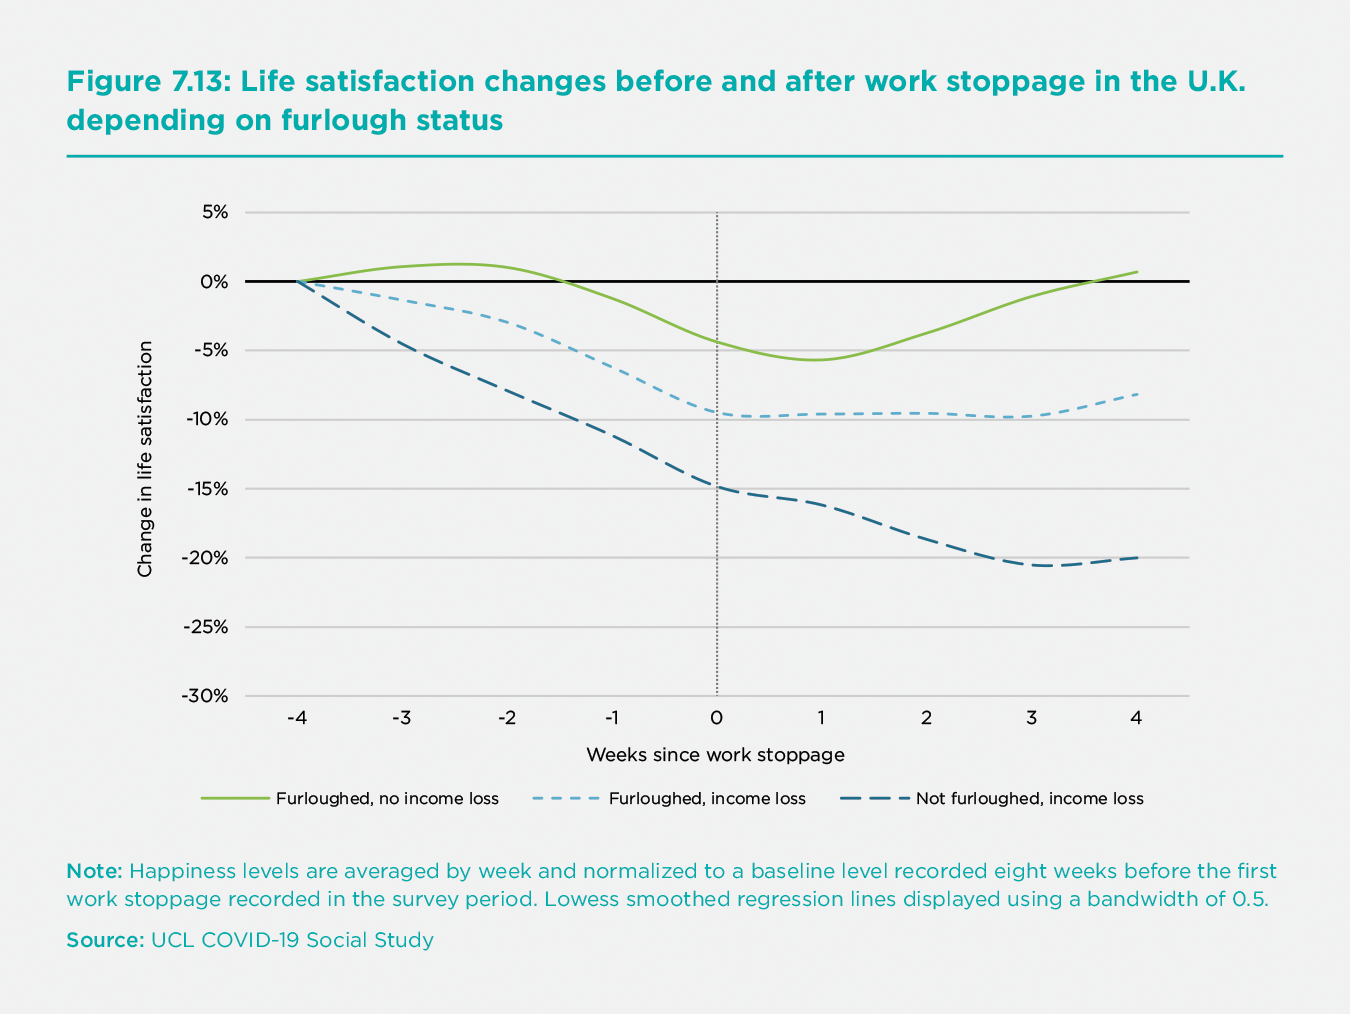 Figure 7.13: Life satisfaction changes before and after work stoppage in the U.K. depending on furlough status